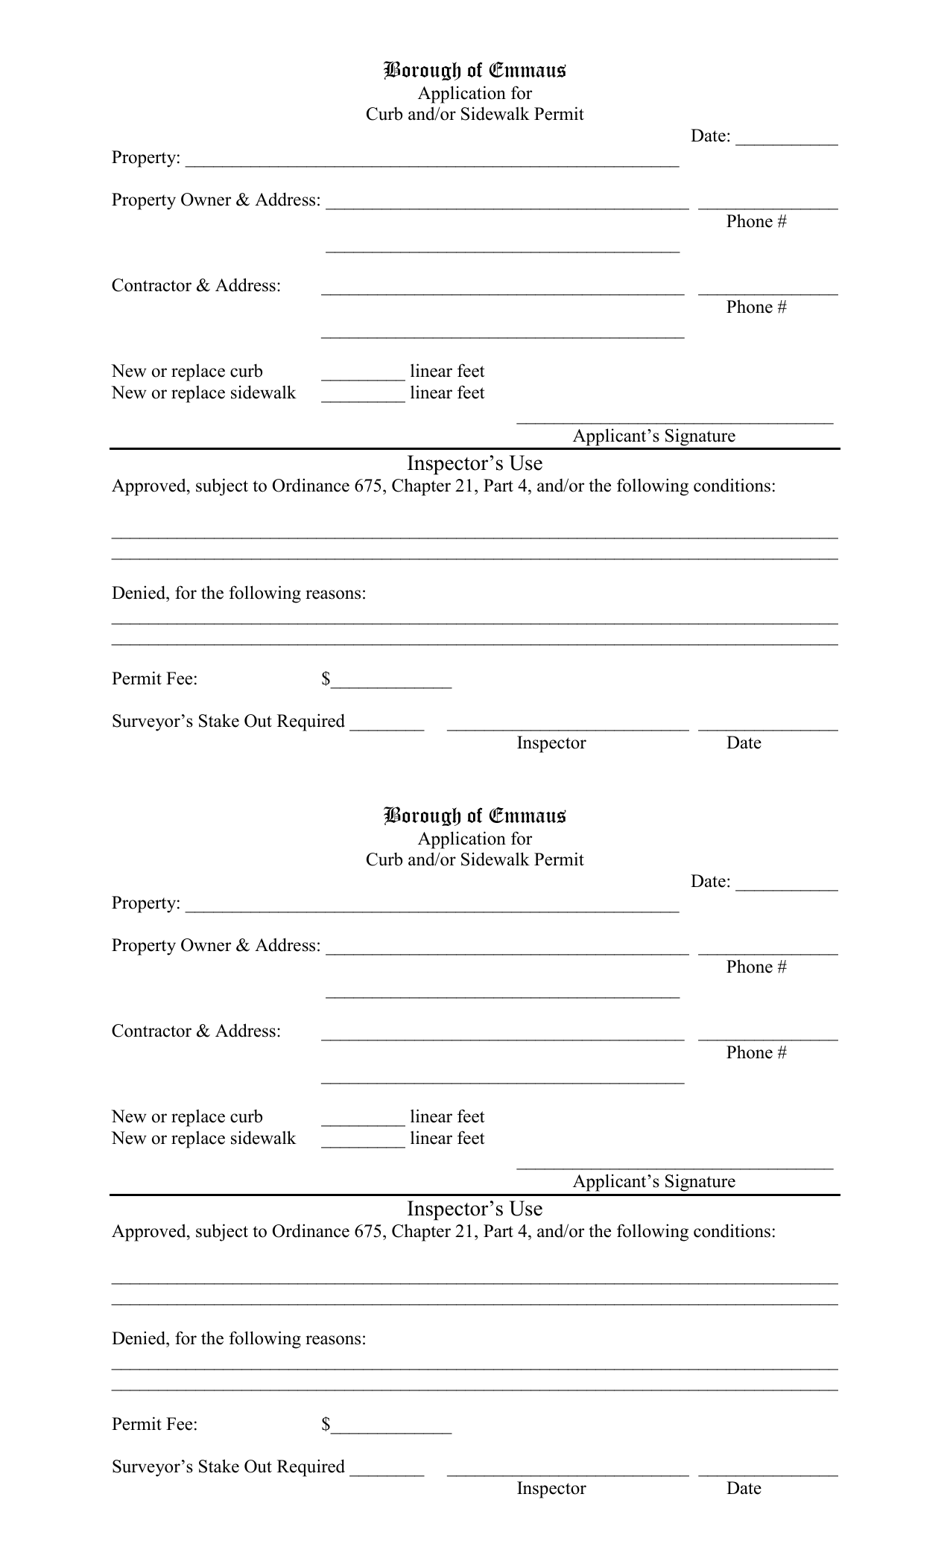 Application for Curb and / or Sidewalk Permit - Borough of Emmaus, Pennsylvania, Page 1